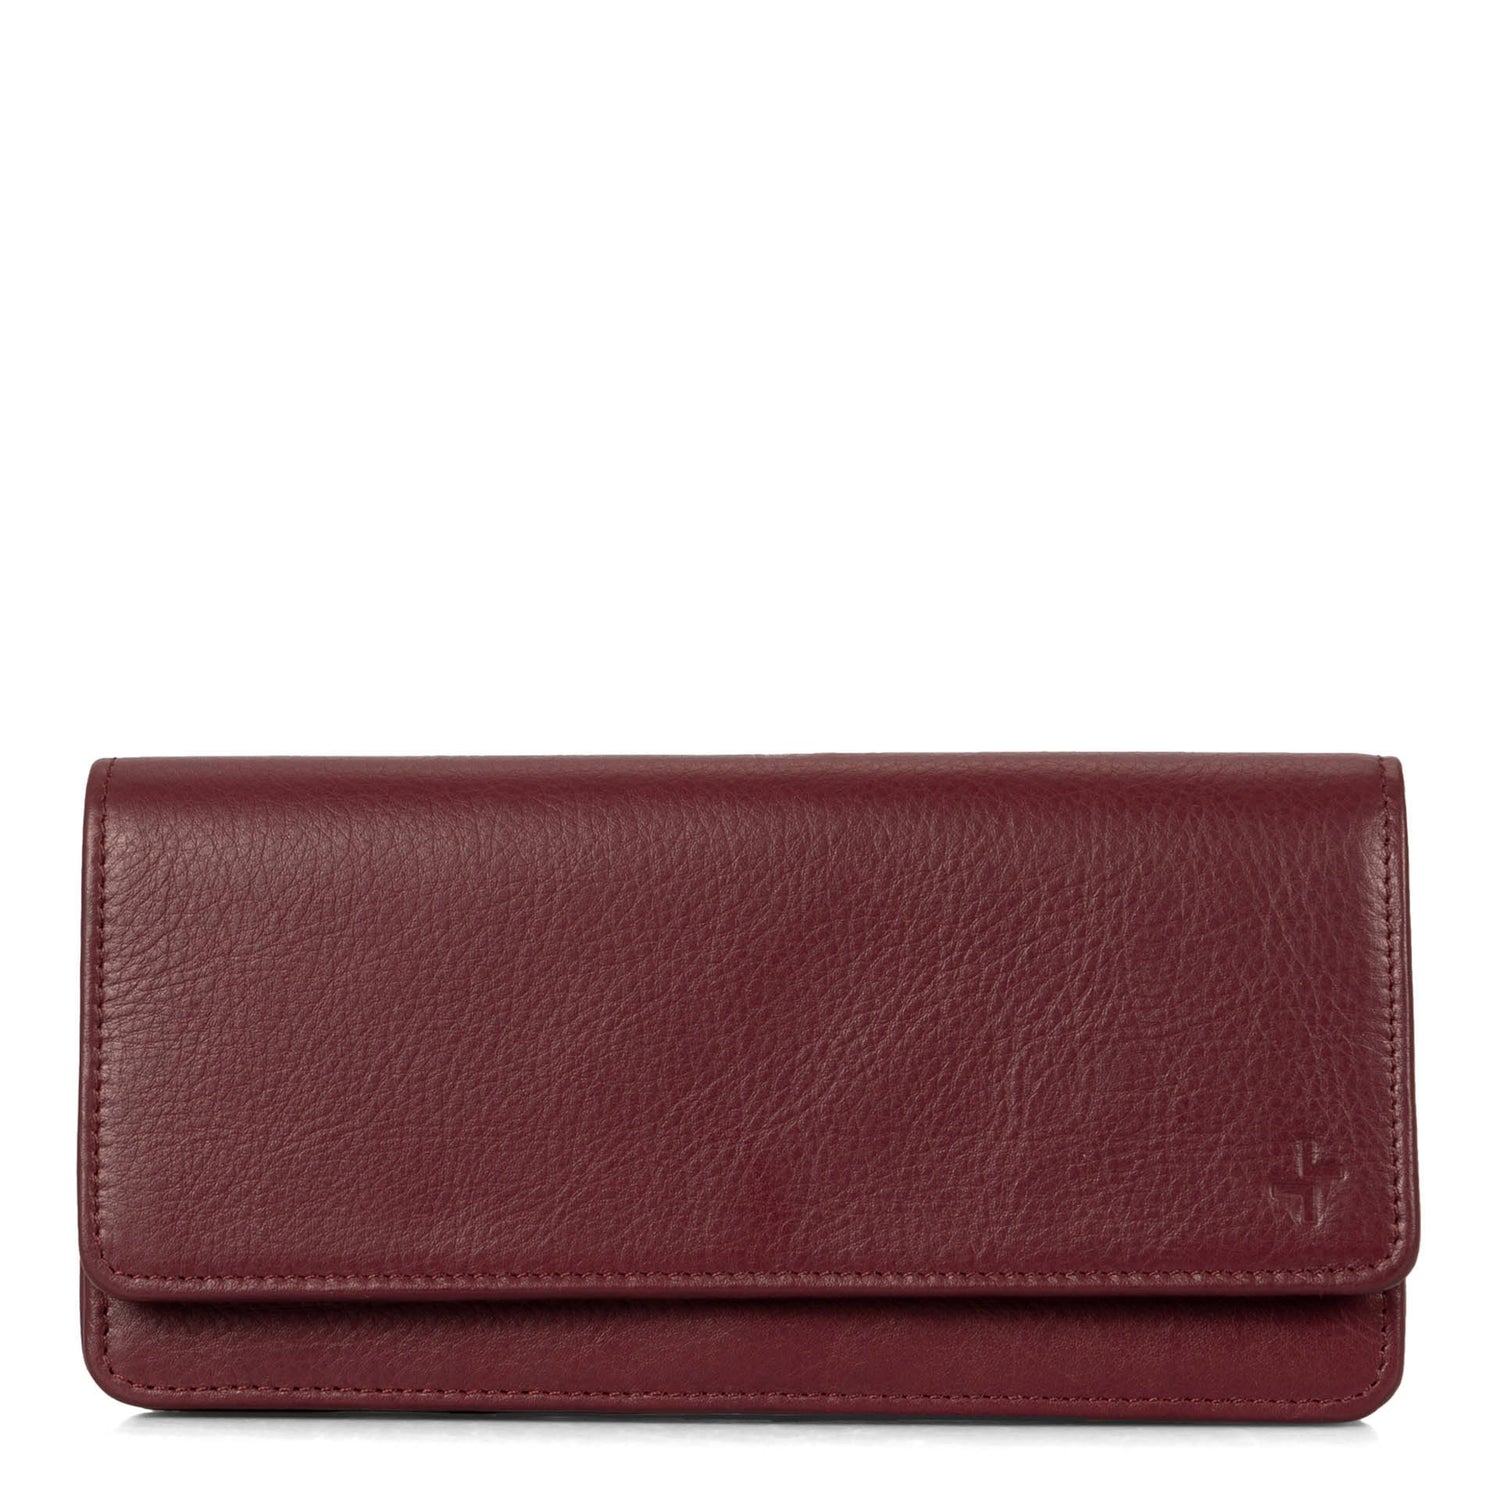 Front side of a burgundy women's wallet called Kelly designed by Tracker showing its leather texture and stitchings.